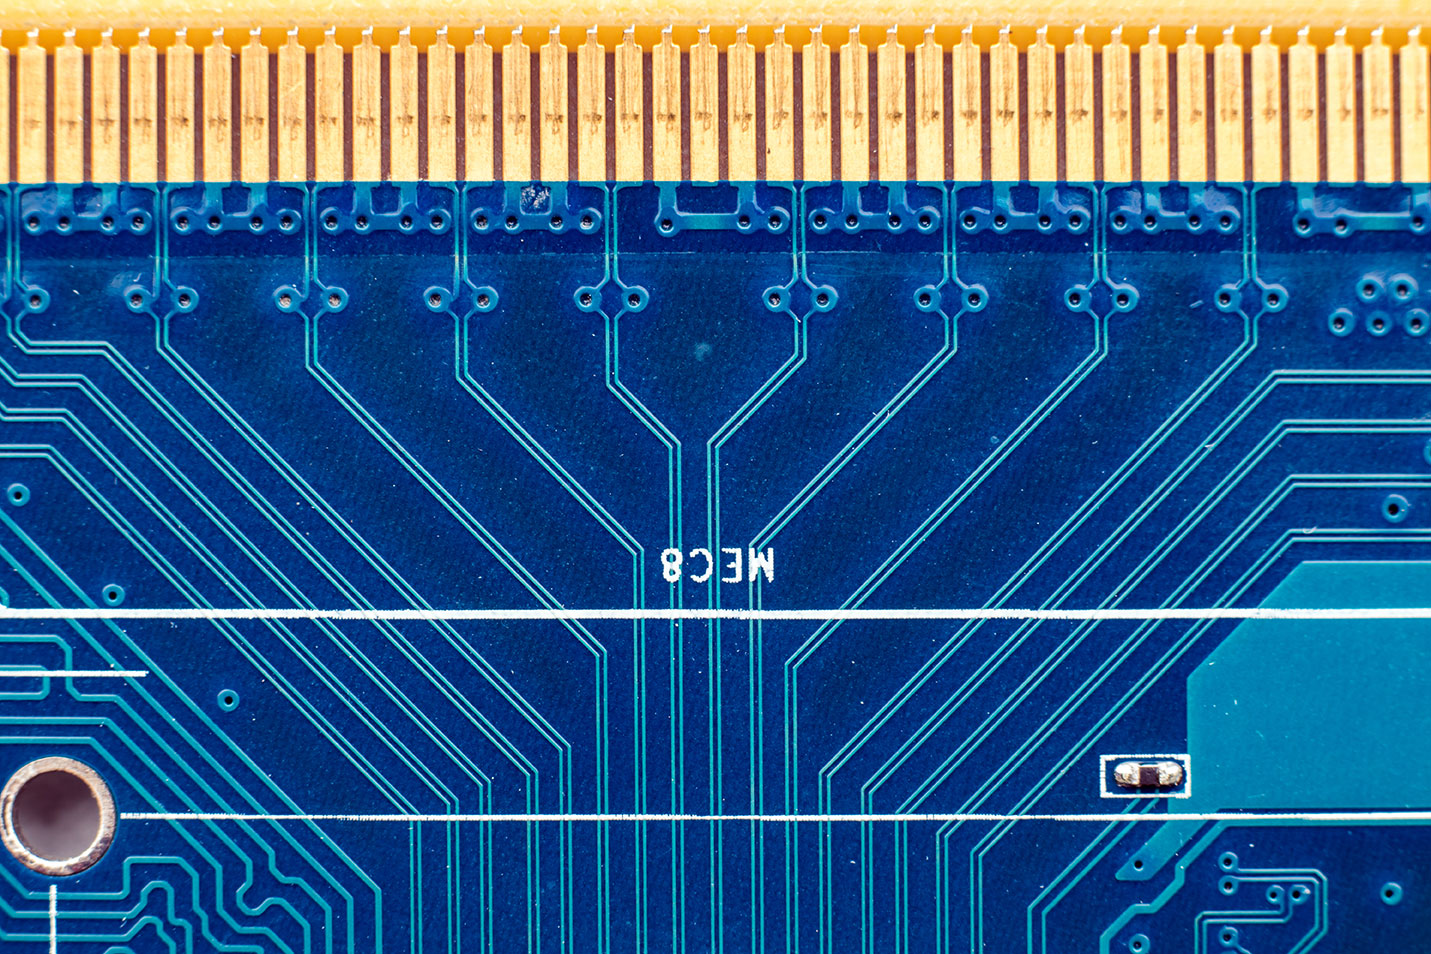 gold-fingers-on-a-pcb.jpg